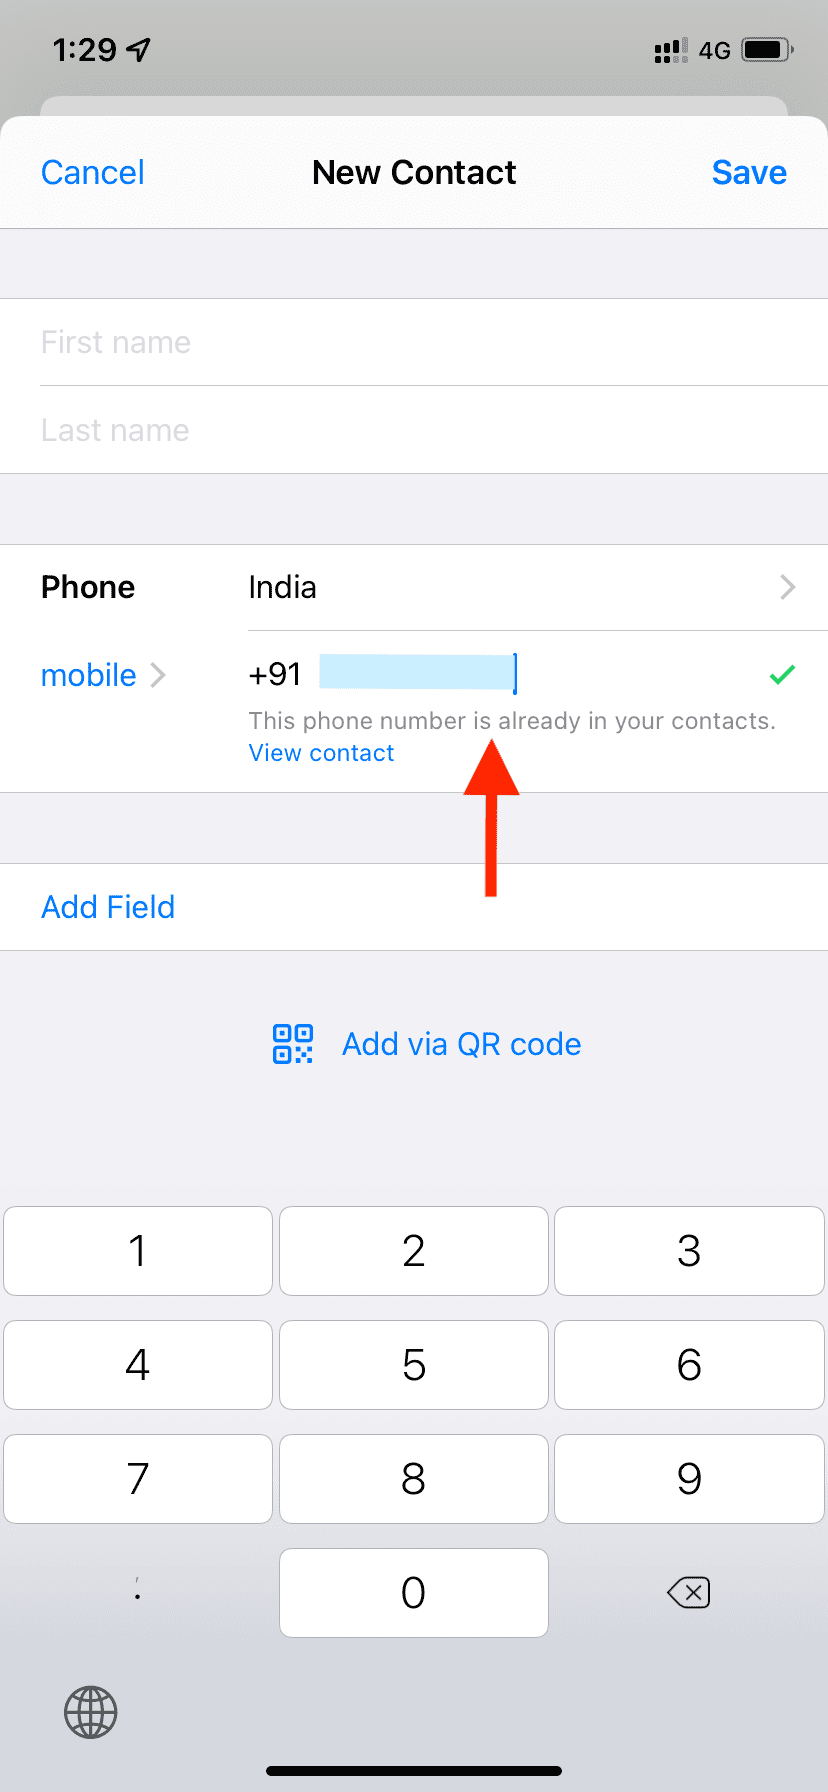 This phone number is already in your contacts